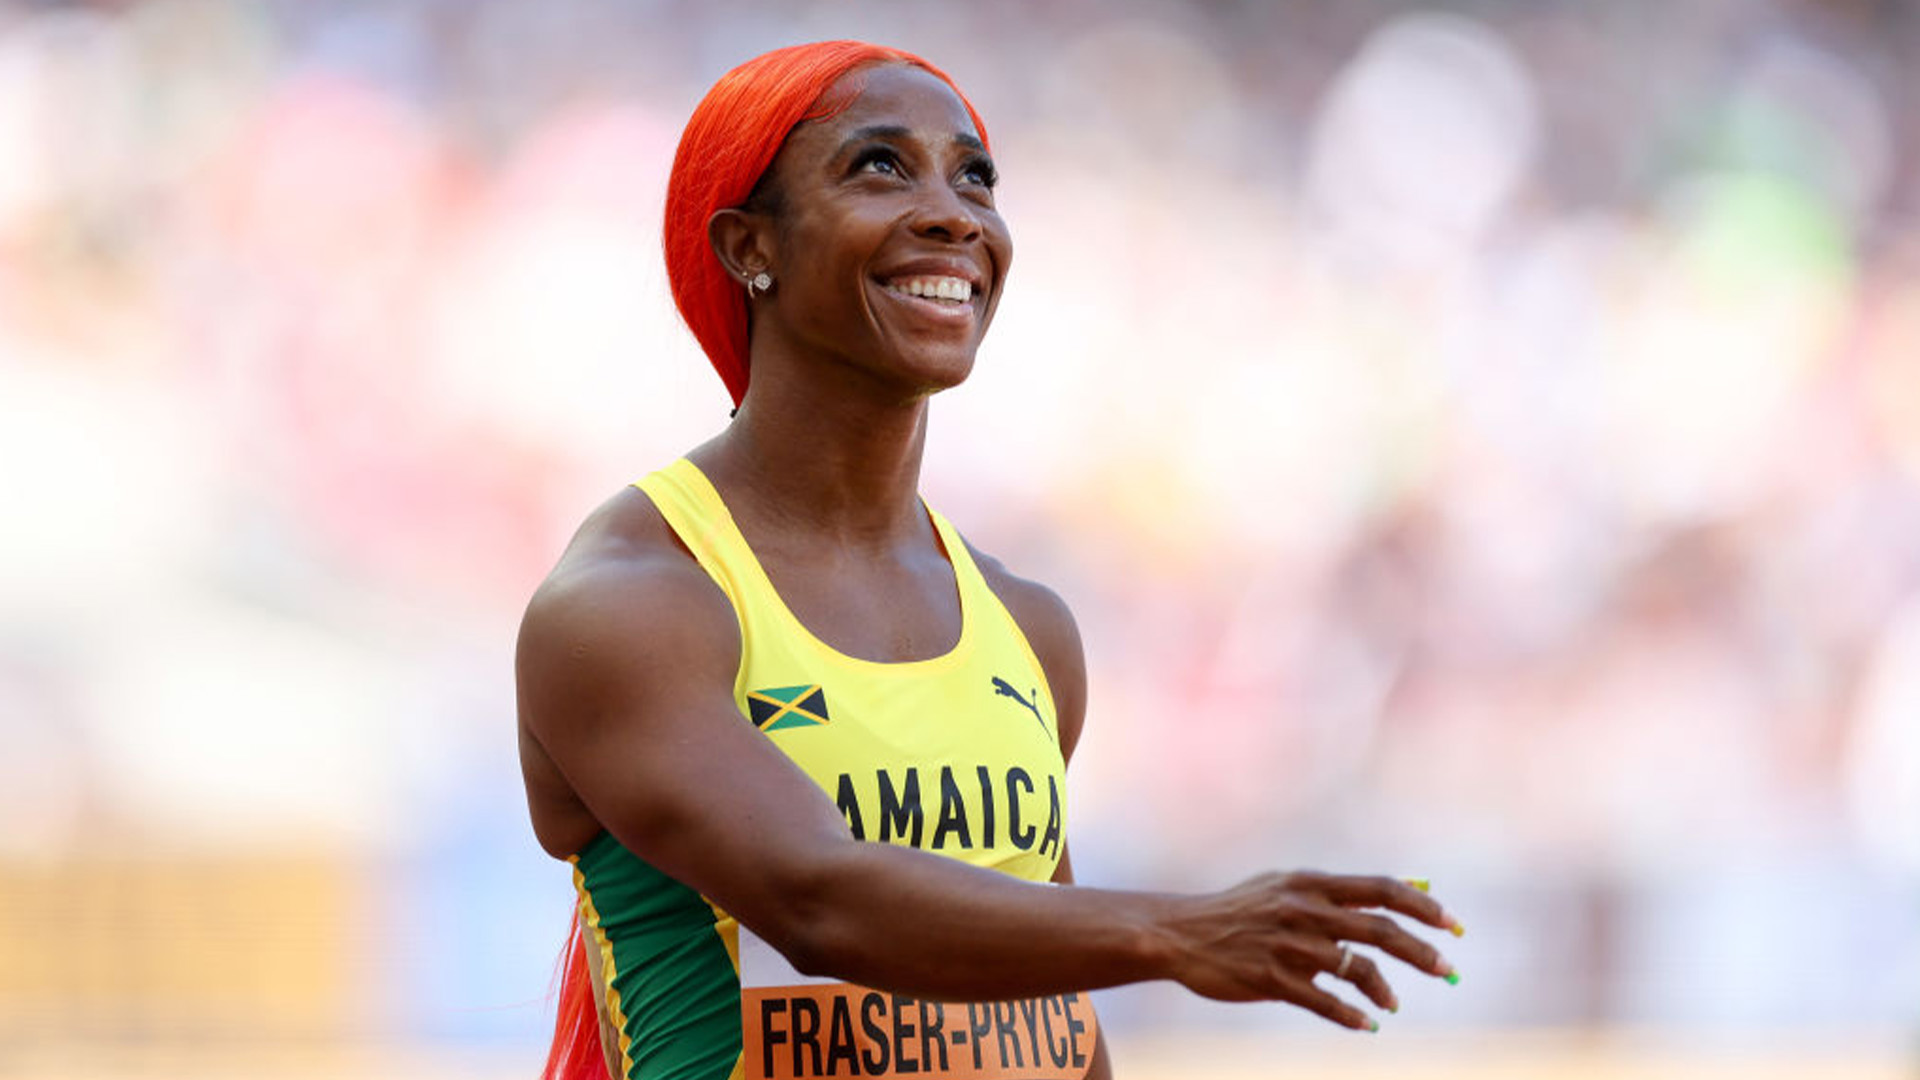 Jamaican Olympic Gold Medalist Shelly-Ann Fraser-Pryce Lands An Endorsement Deal With Luxury Watch Brand Richard Mille